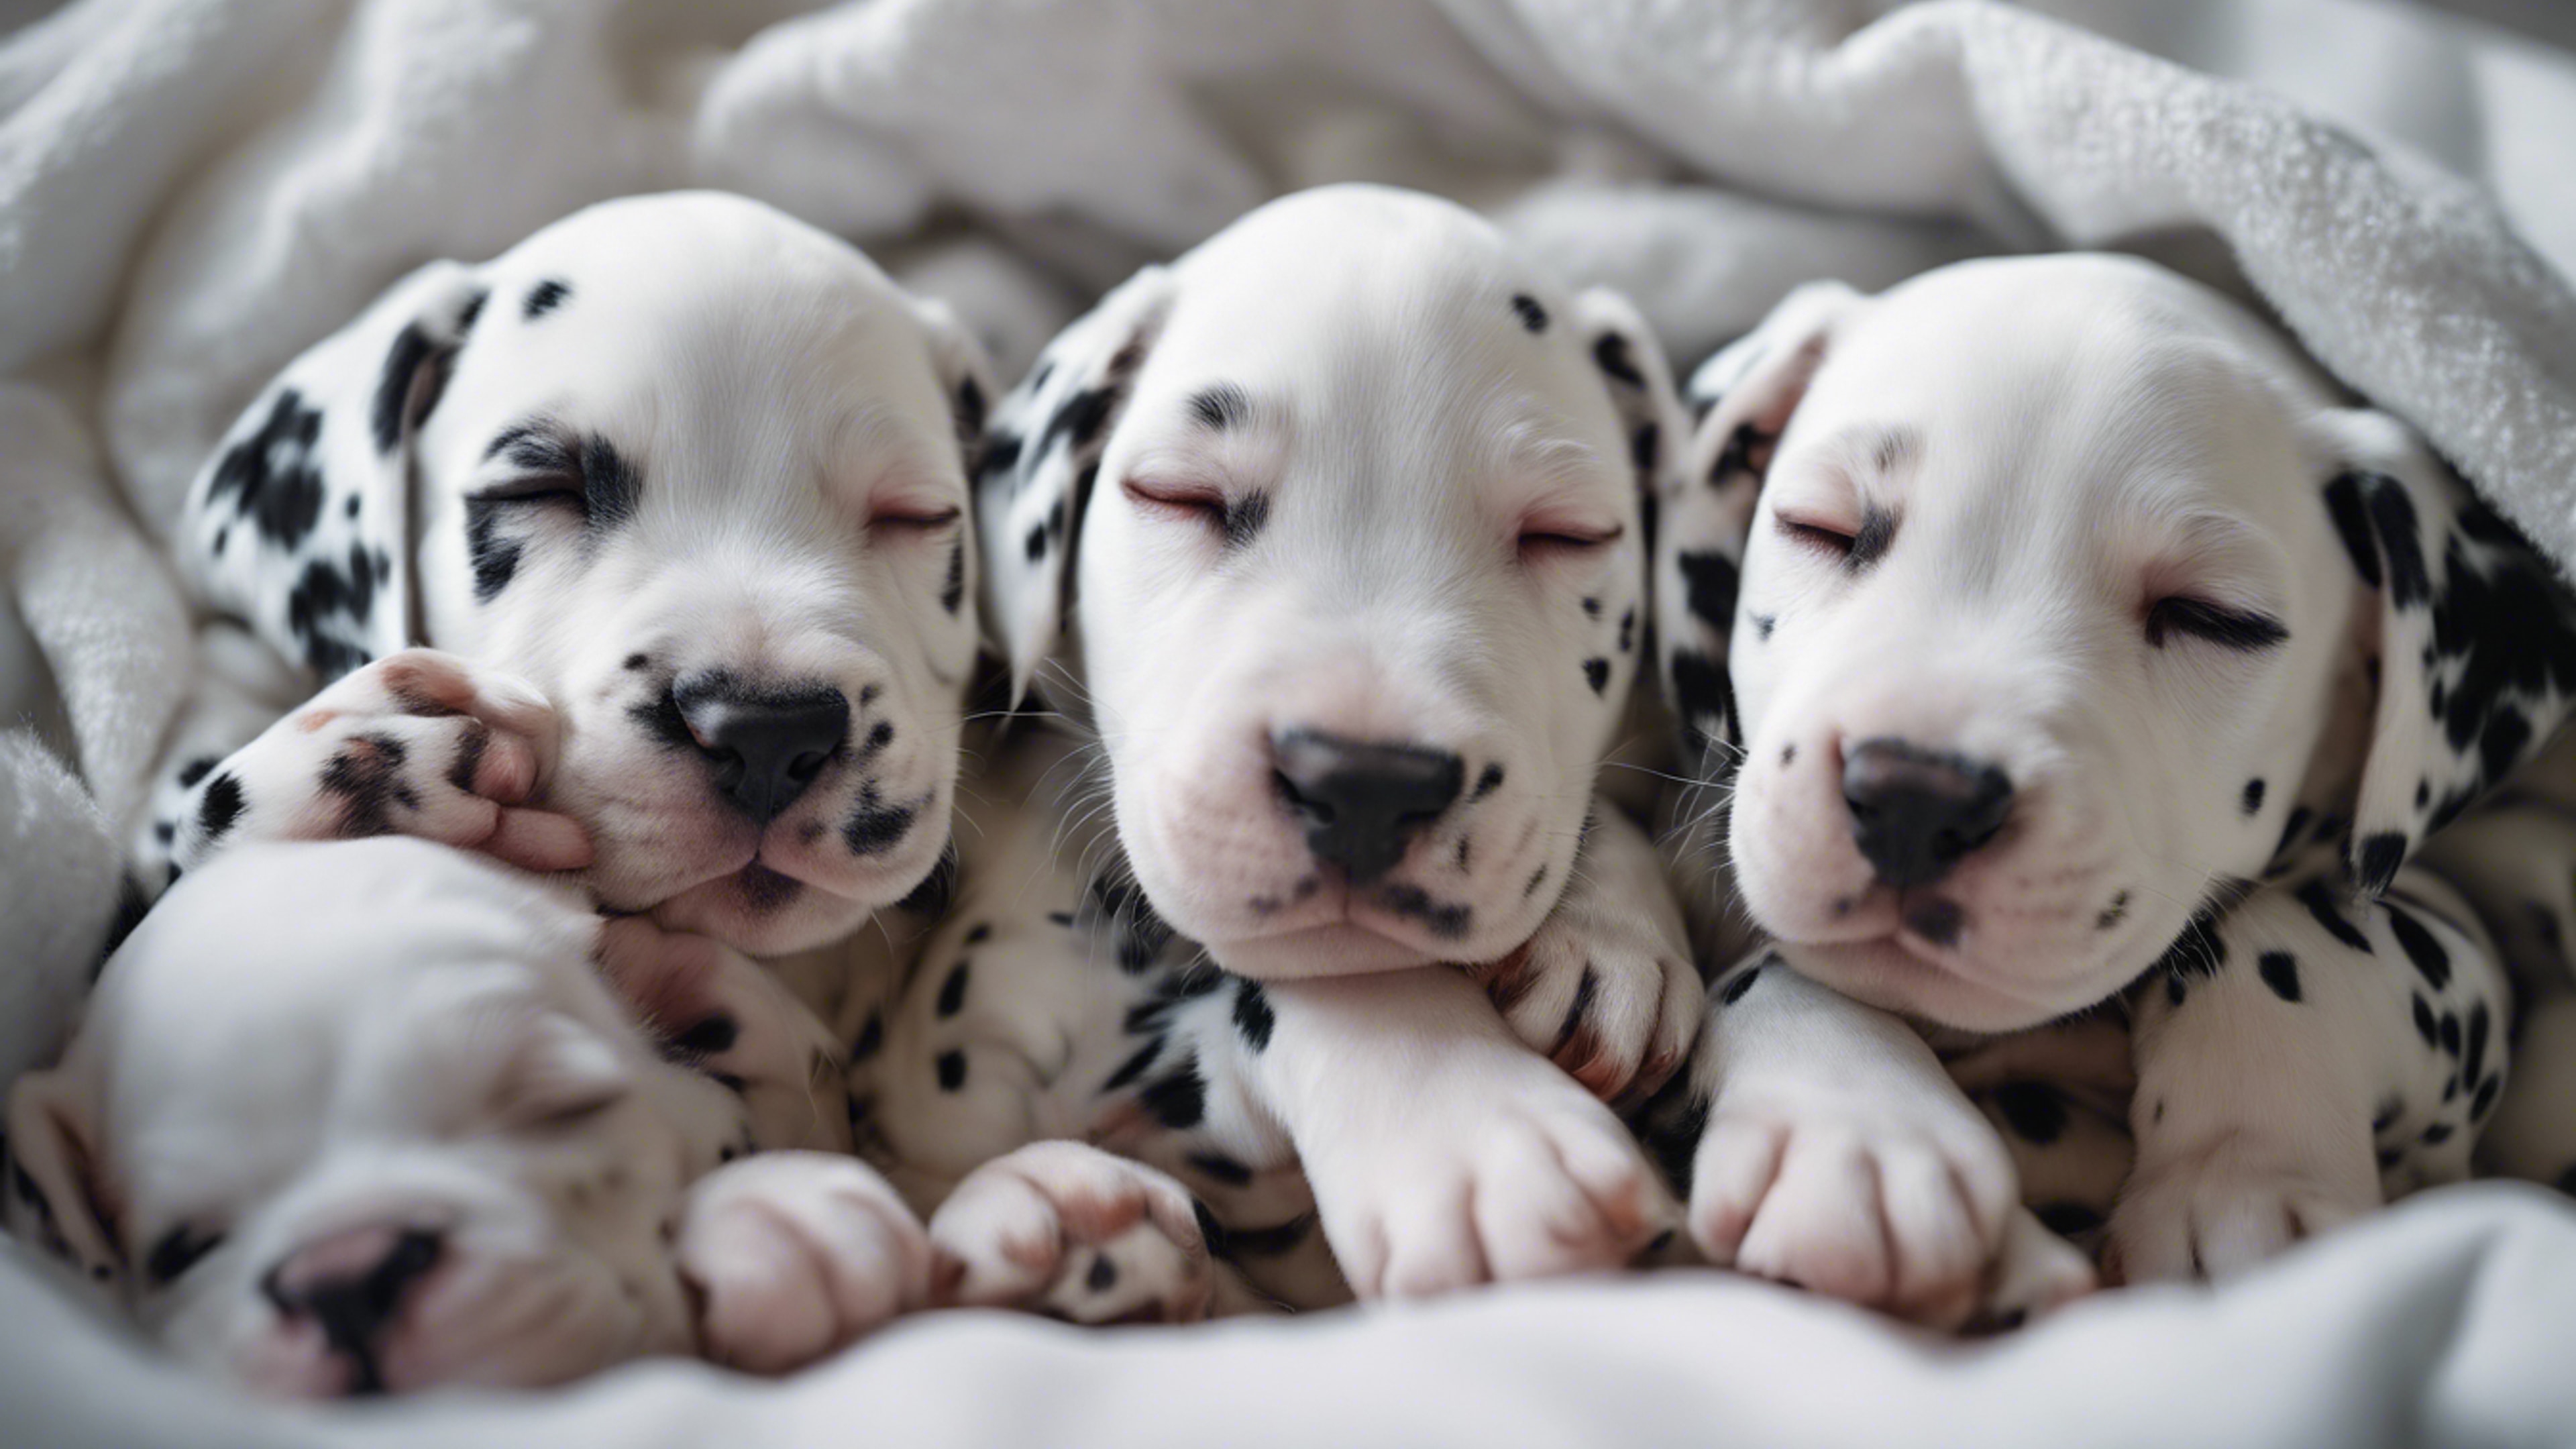 A cluster of sleeping Dalmatian puppies under a cozy white blanket in a nursery room. ផ្ទាំង​រូបភាព[4a5dc312c1f344509ca9]